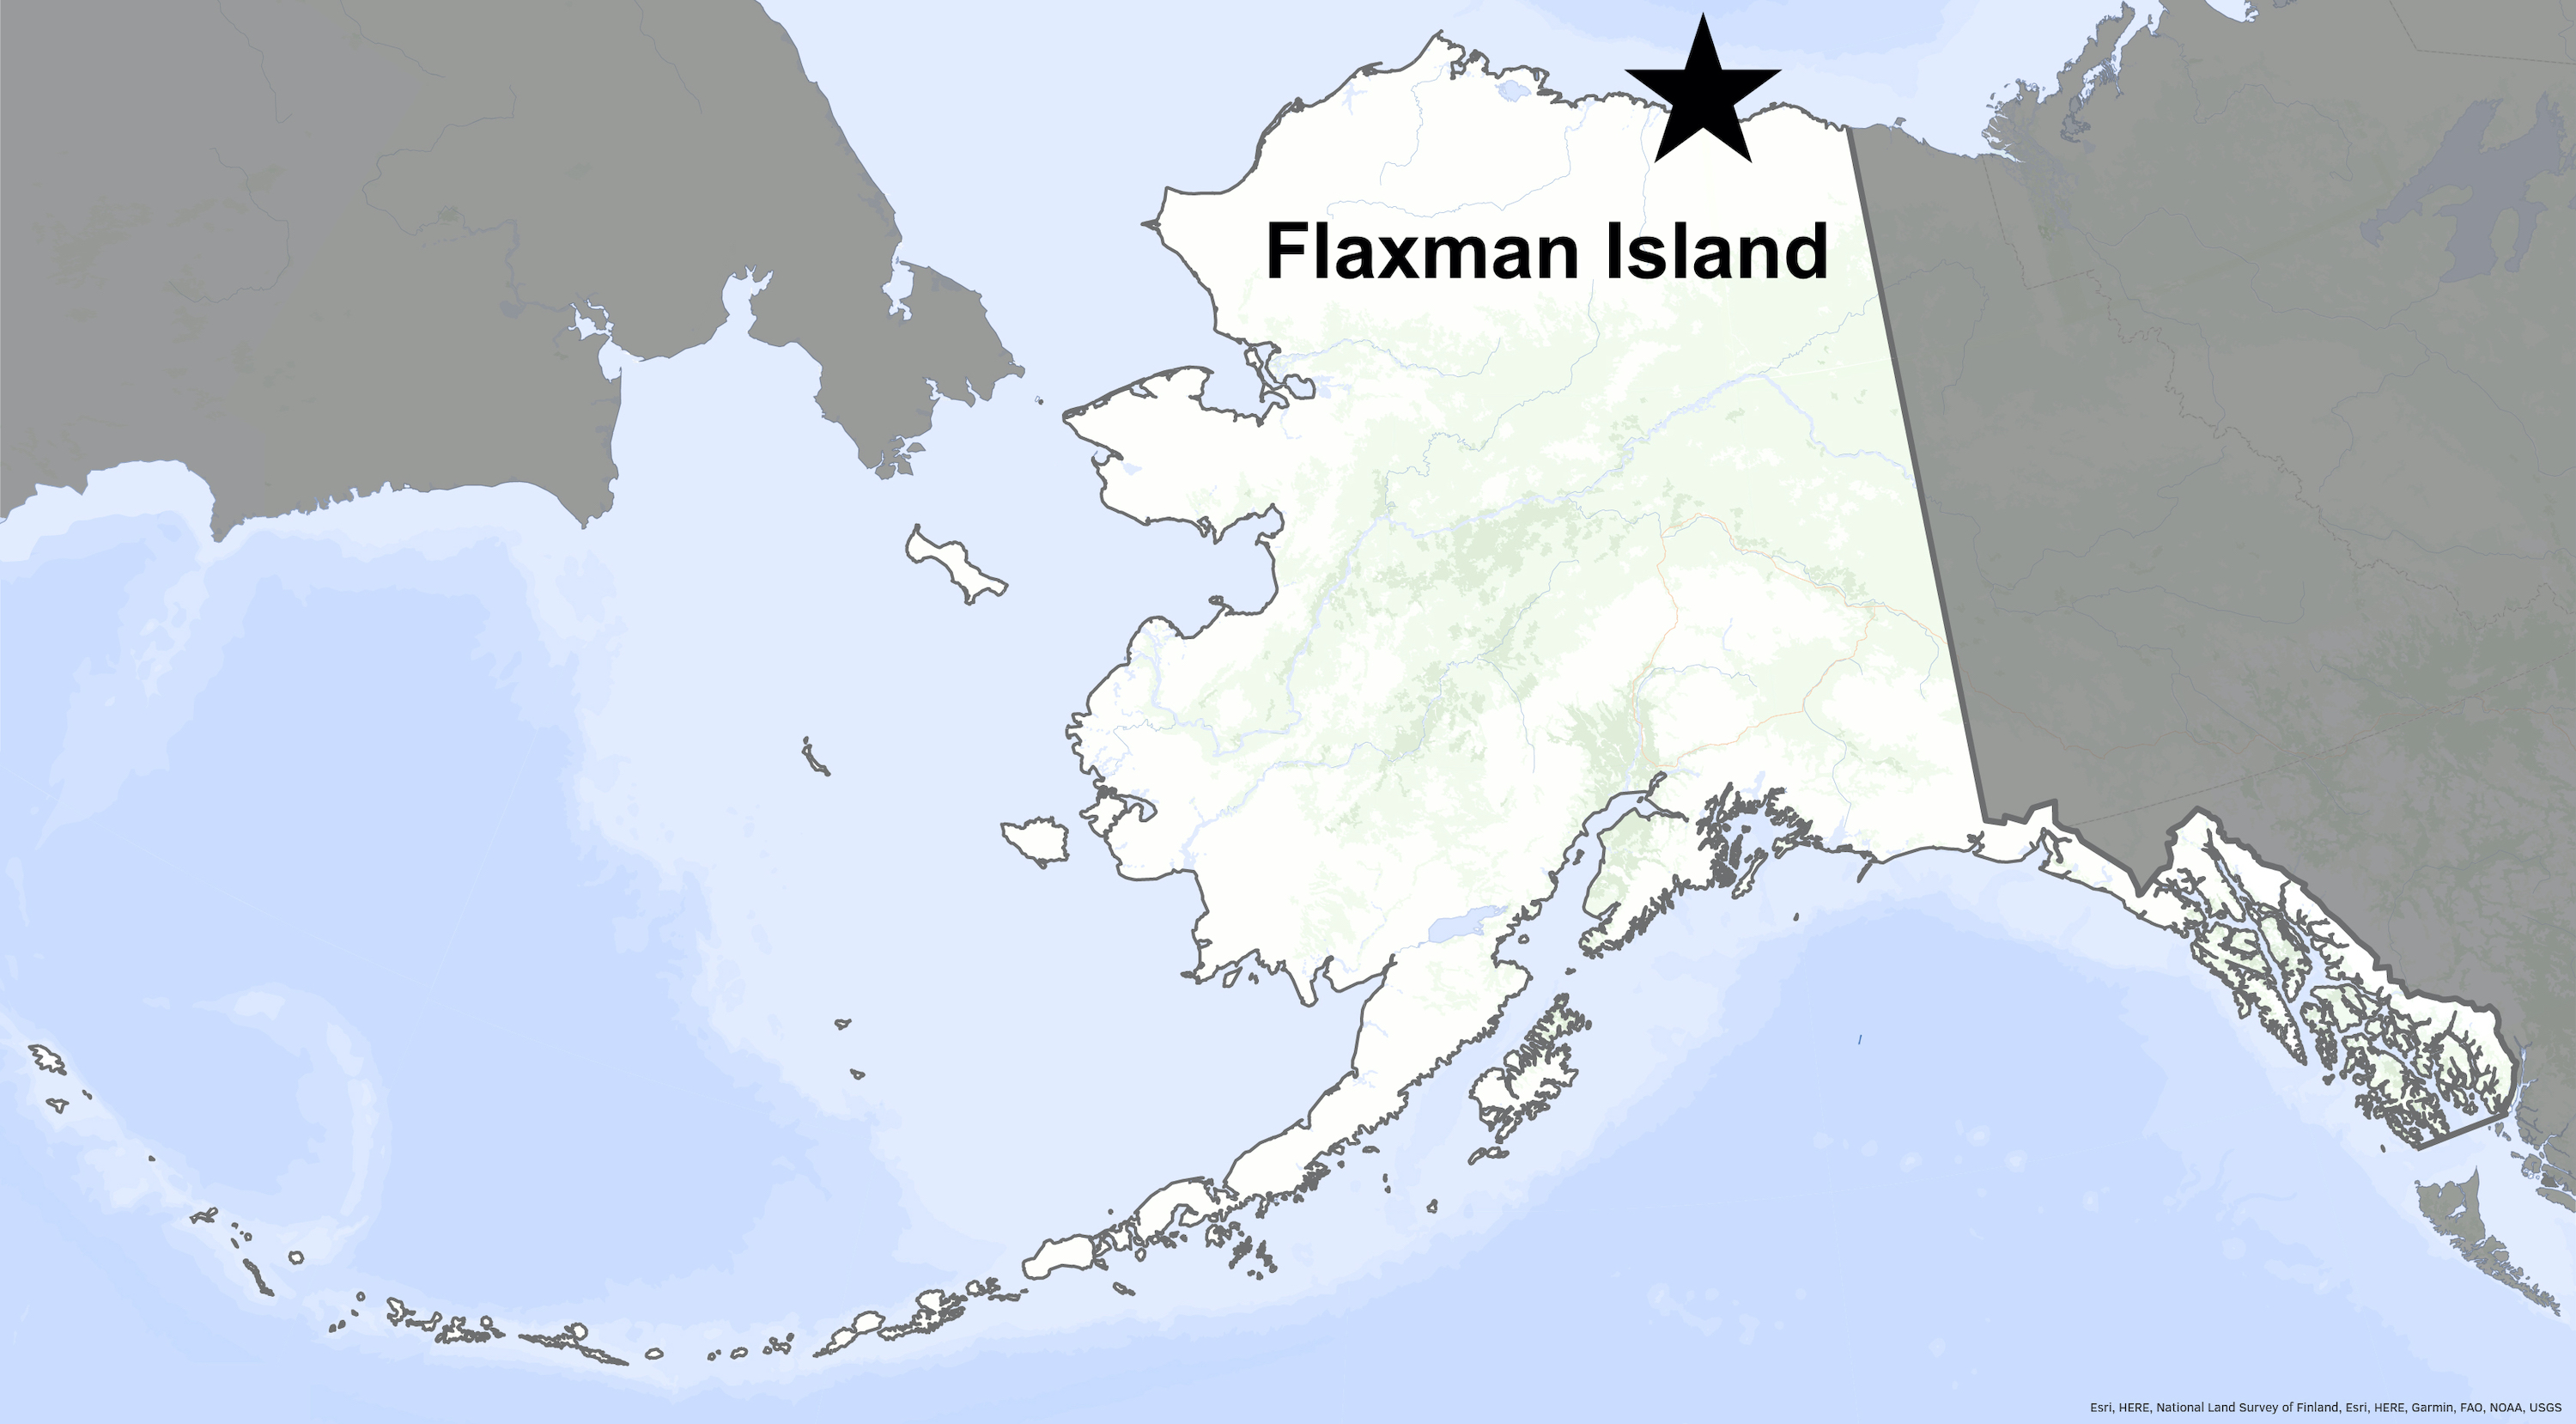 A star on a map of Alaska shows the location of Flaxman Island off the northern coast.